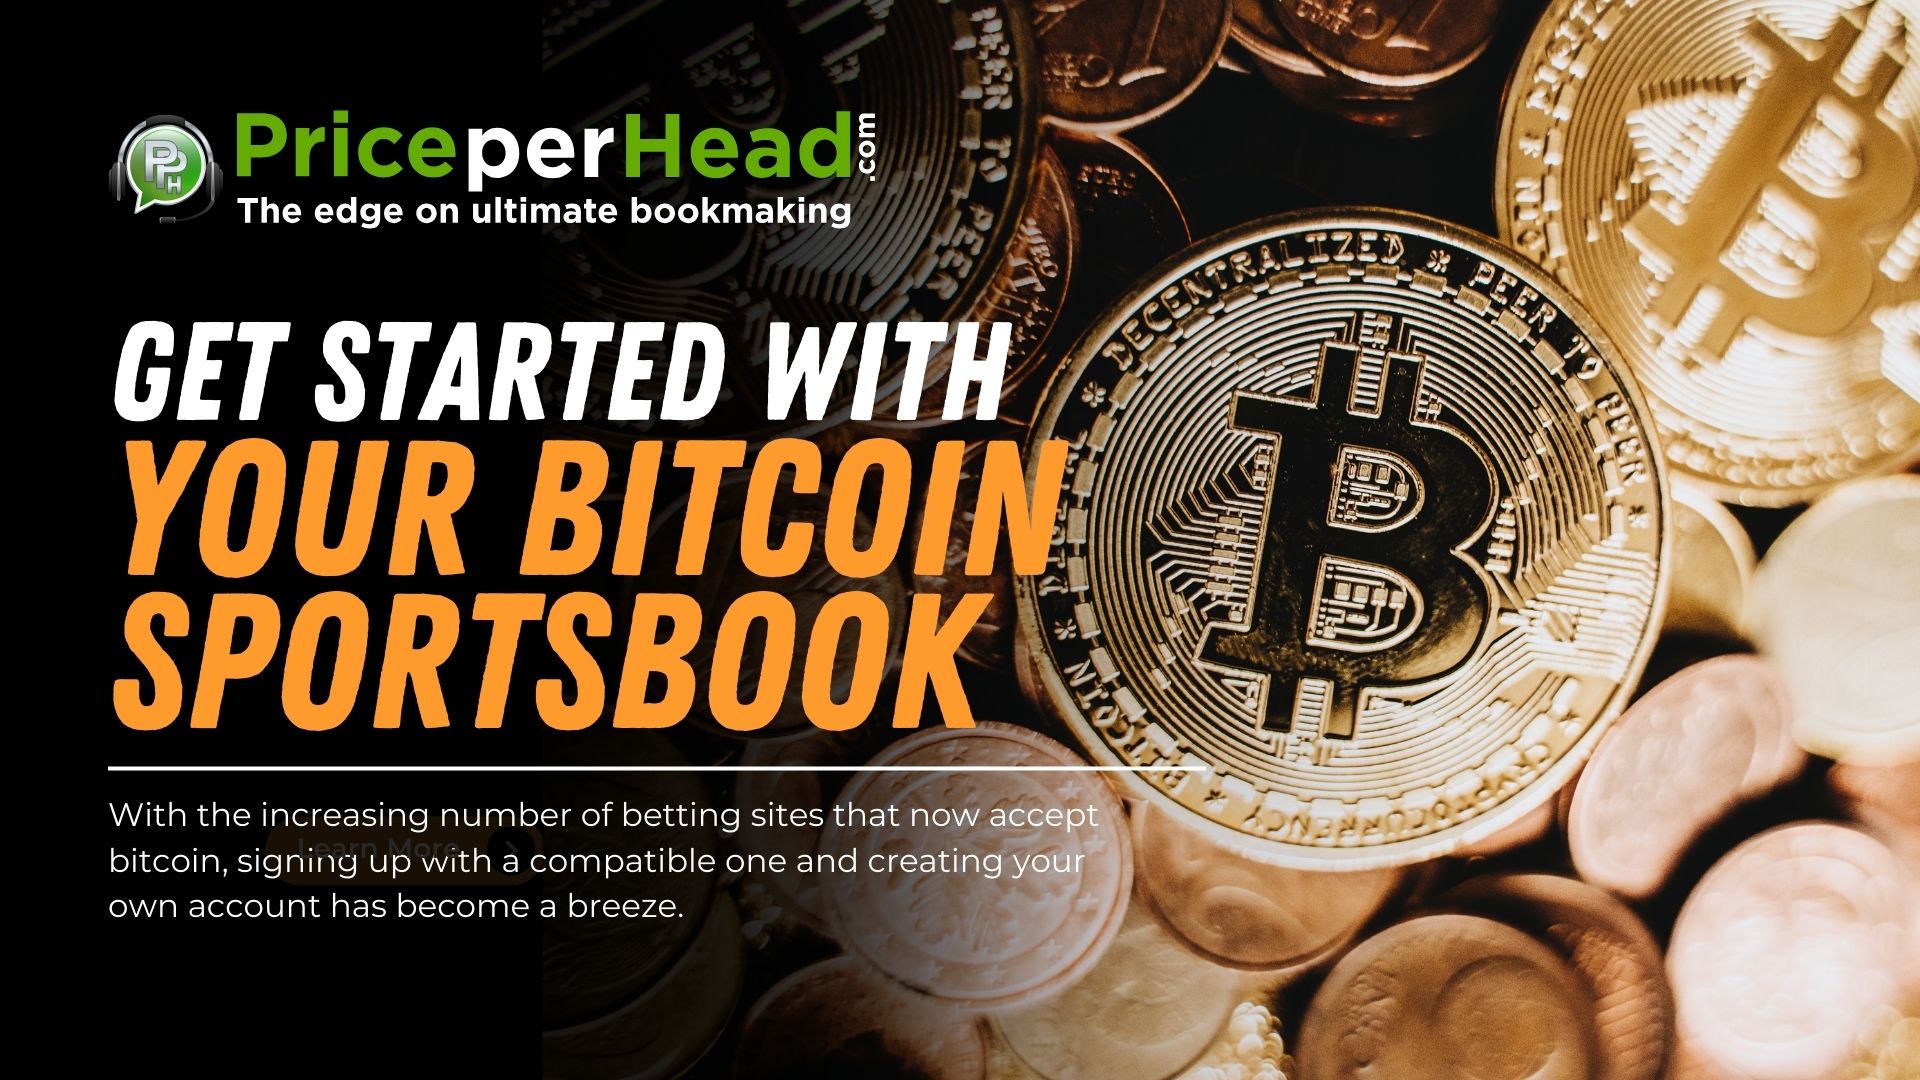 get start with your bitcoin sportsbook, pay per head service, price per head